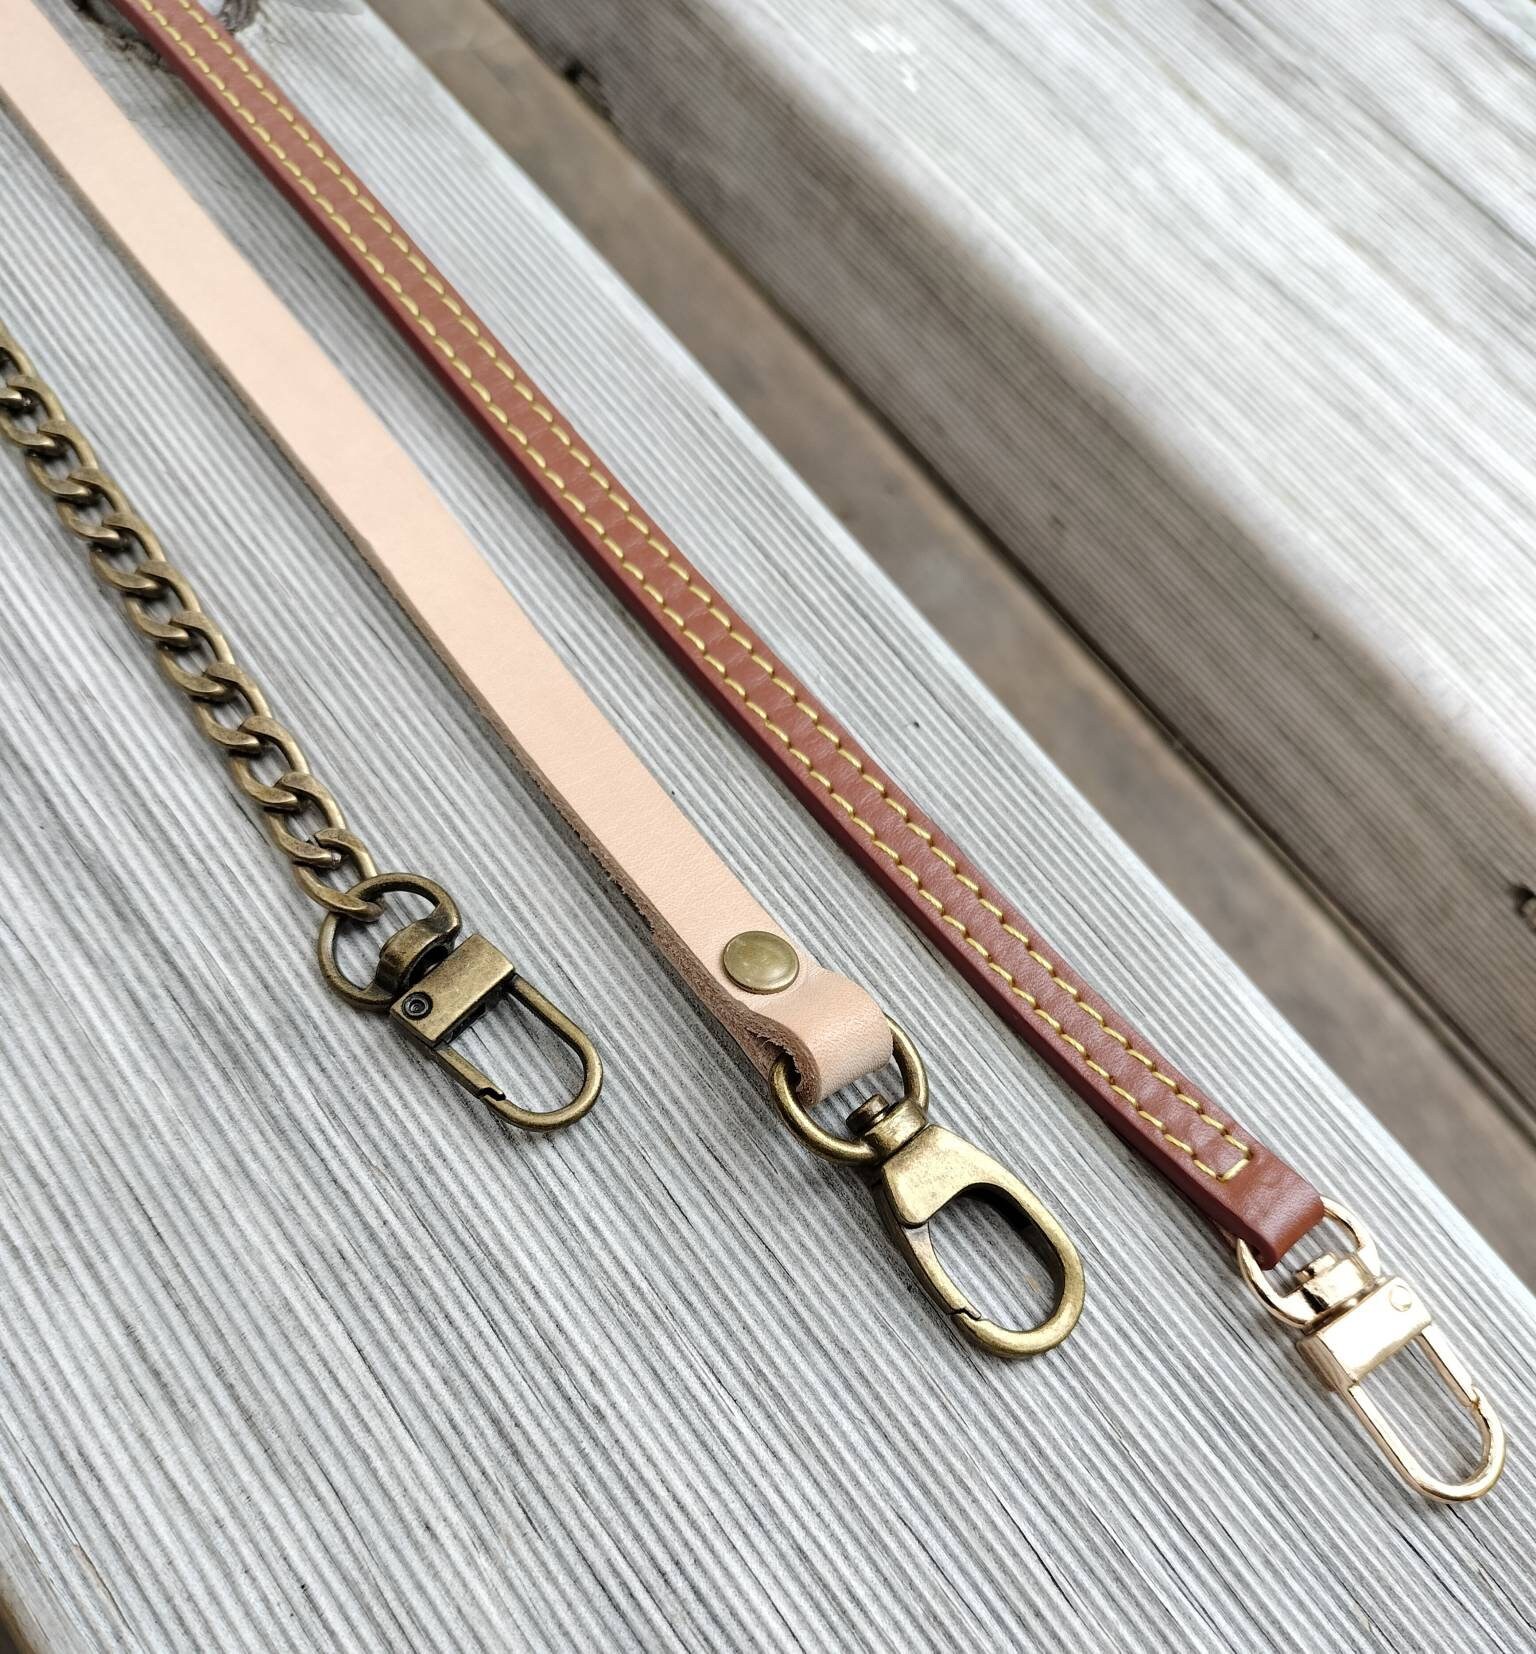 Leather Bag Strap,leather Purse Strap,bag Replacement Strap,crossbody Strap  for Purse,shoulder Straps for Bags,shoulder Bag Strap 